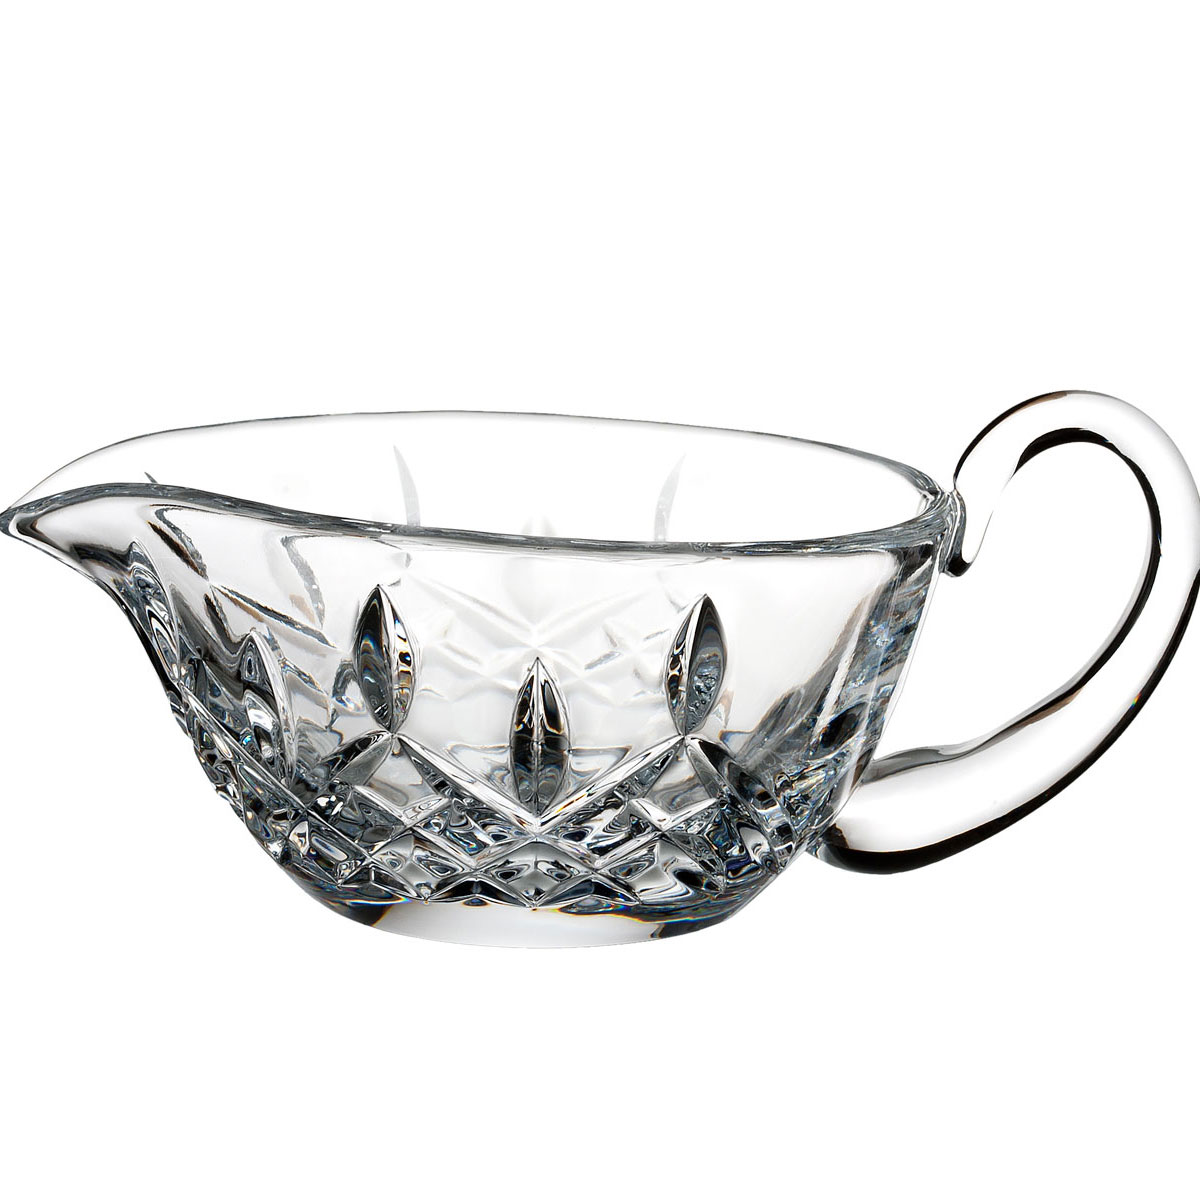 Waterford Crystal, Lismore Gravy Boat